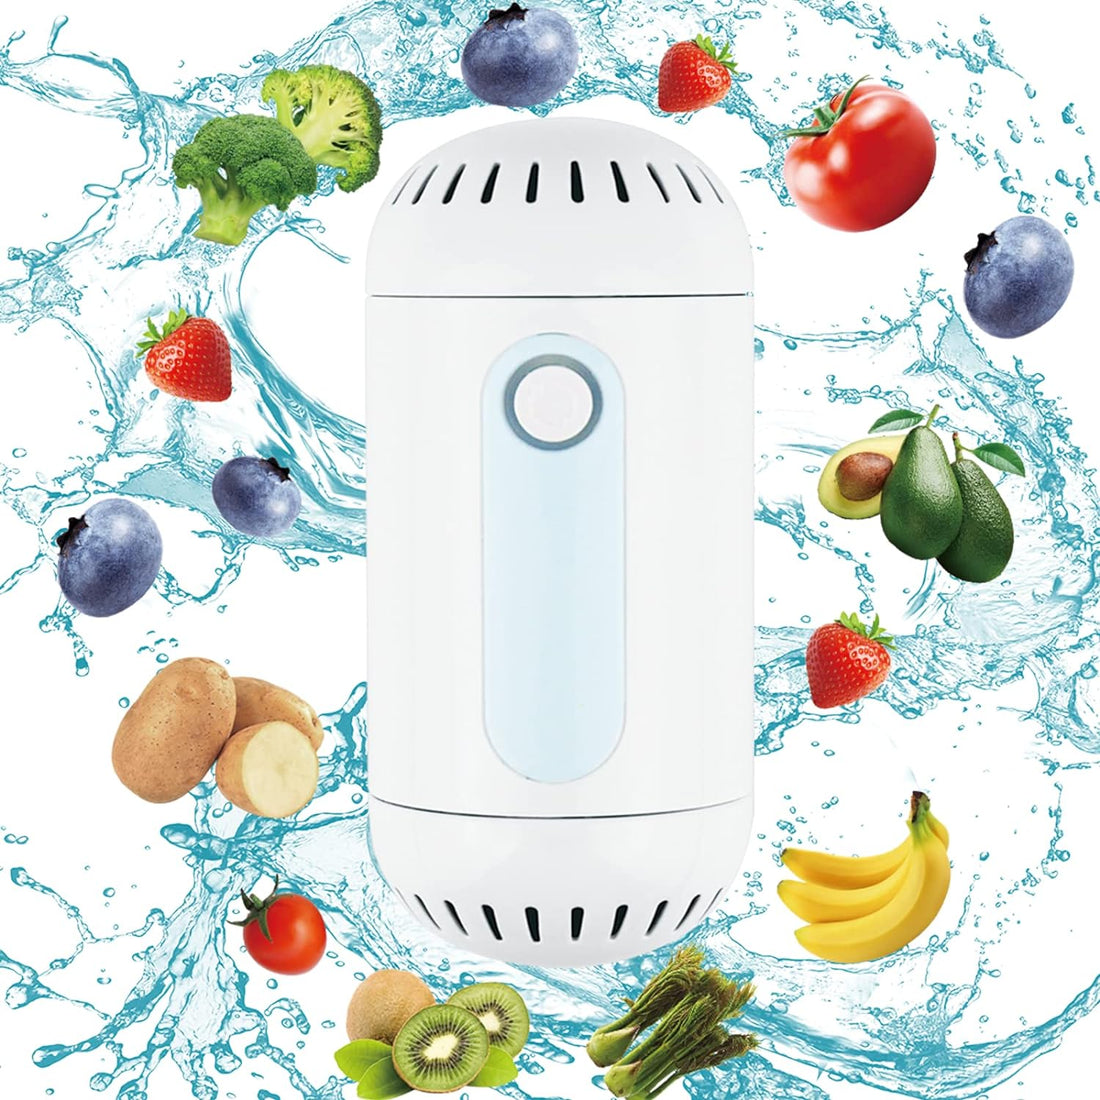 Dual-Core Fruit and Vegetable Washing Machine, Portable USB Rechargeable Fruit and Vegetable Cleaner, Fully Automatic Wireless Food Purifier for Cleaning Fruits Vegetables Rice Meat